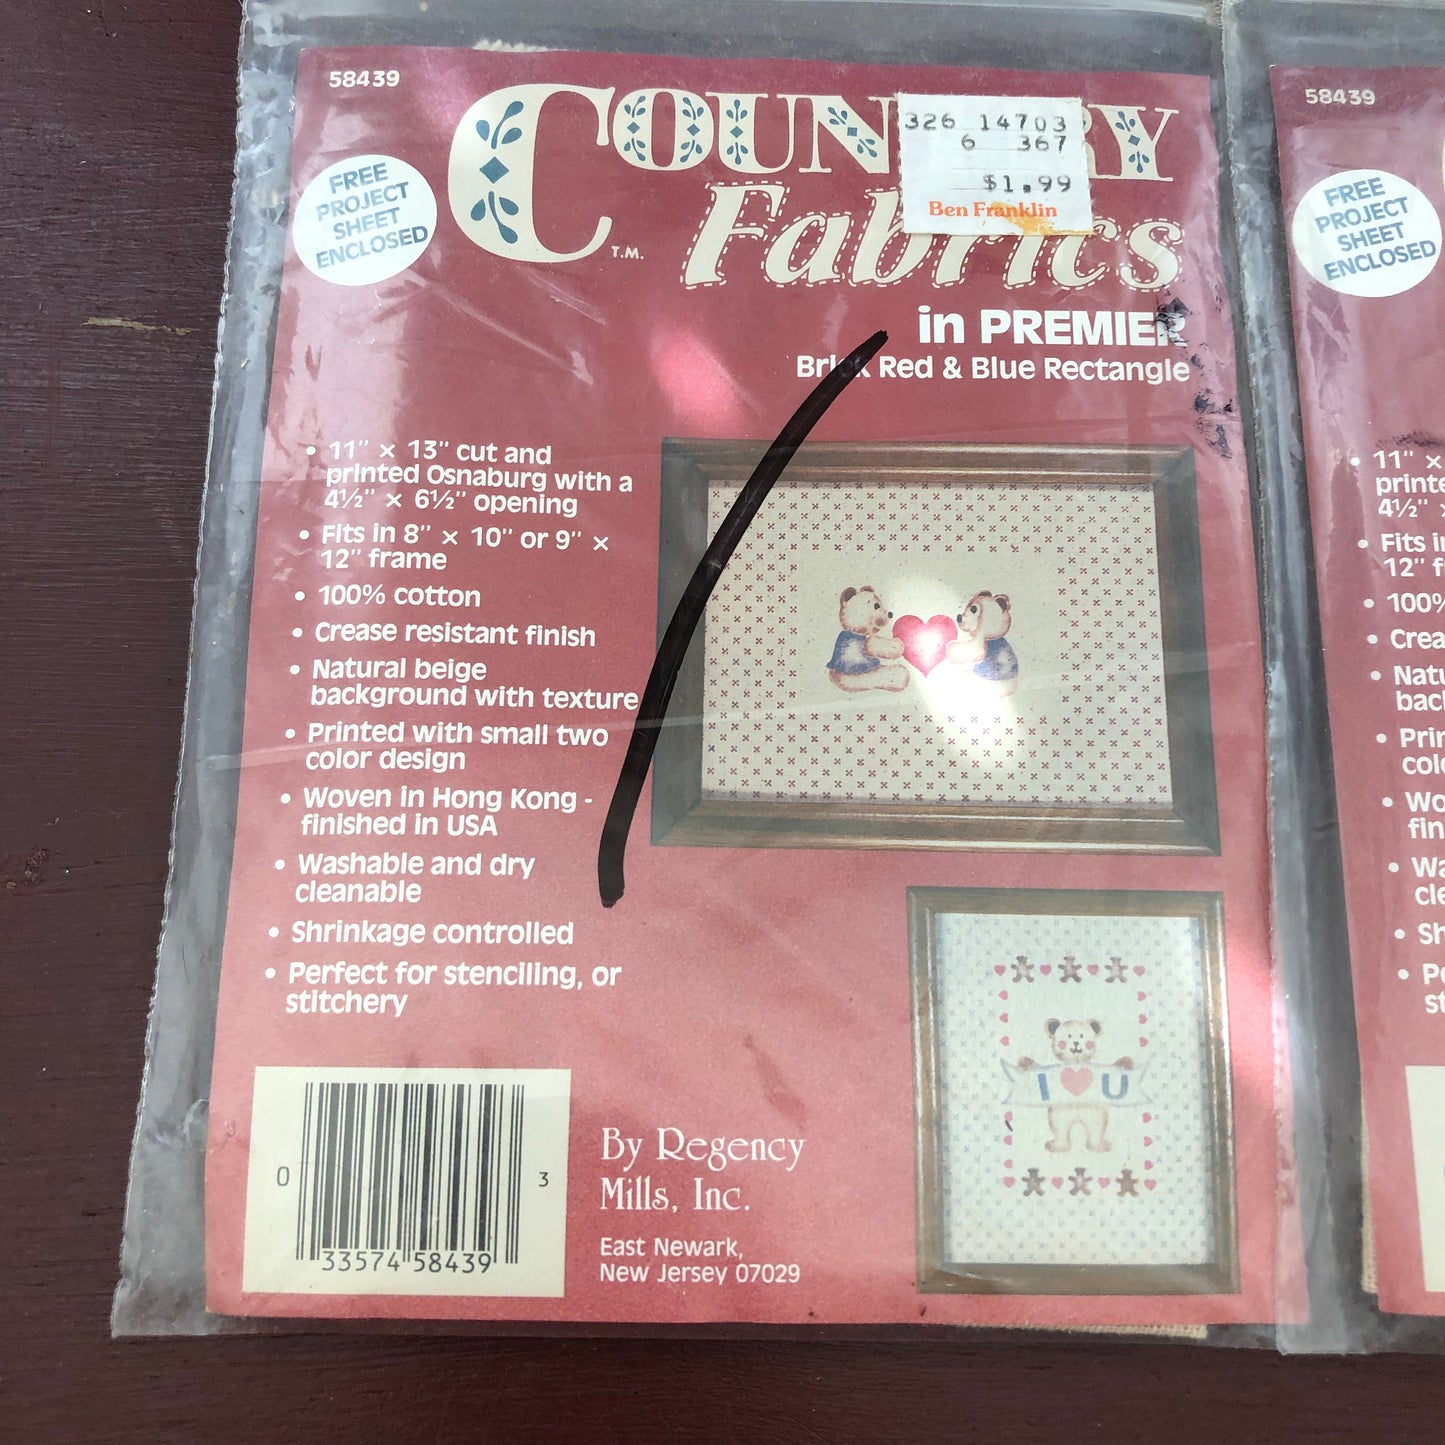 Country Fabrics in Premier, Set of 2, Brick Red & Blue Rectangle, by Regency Mills, 11 by 13 Inches, 4.5 by 6.5 Inch Stitch Area